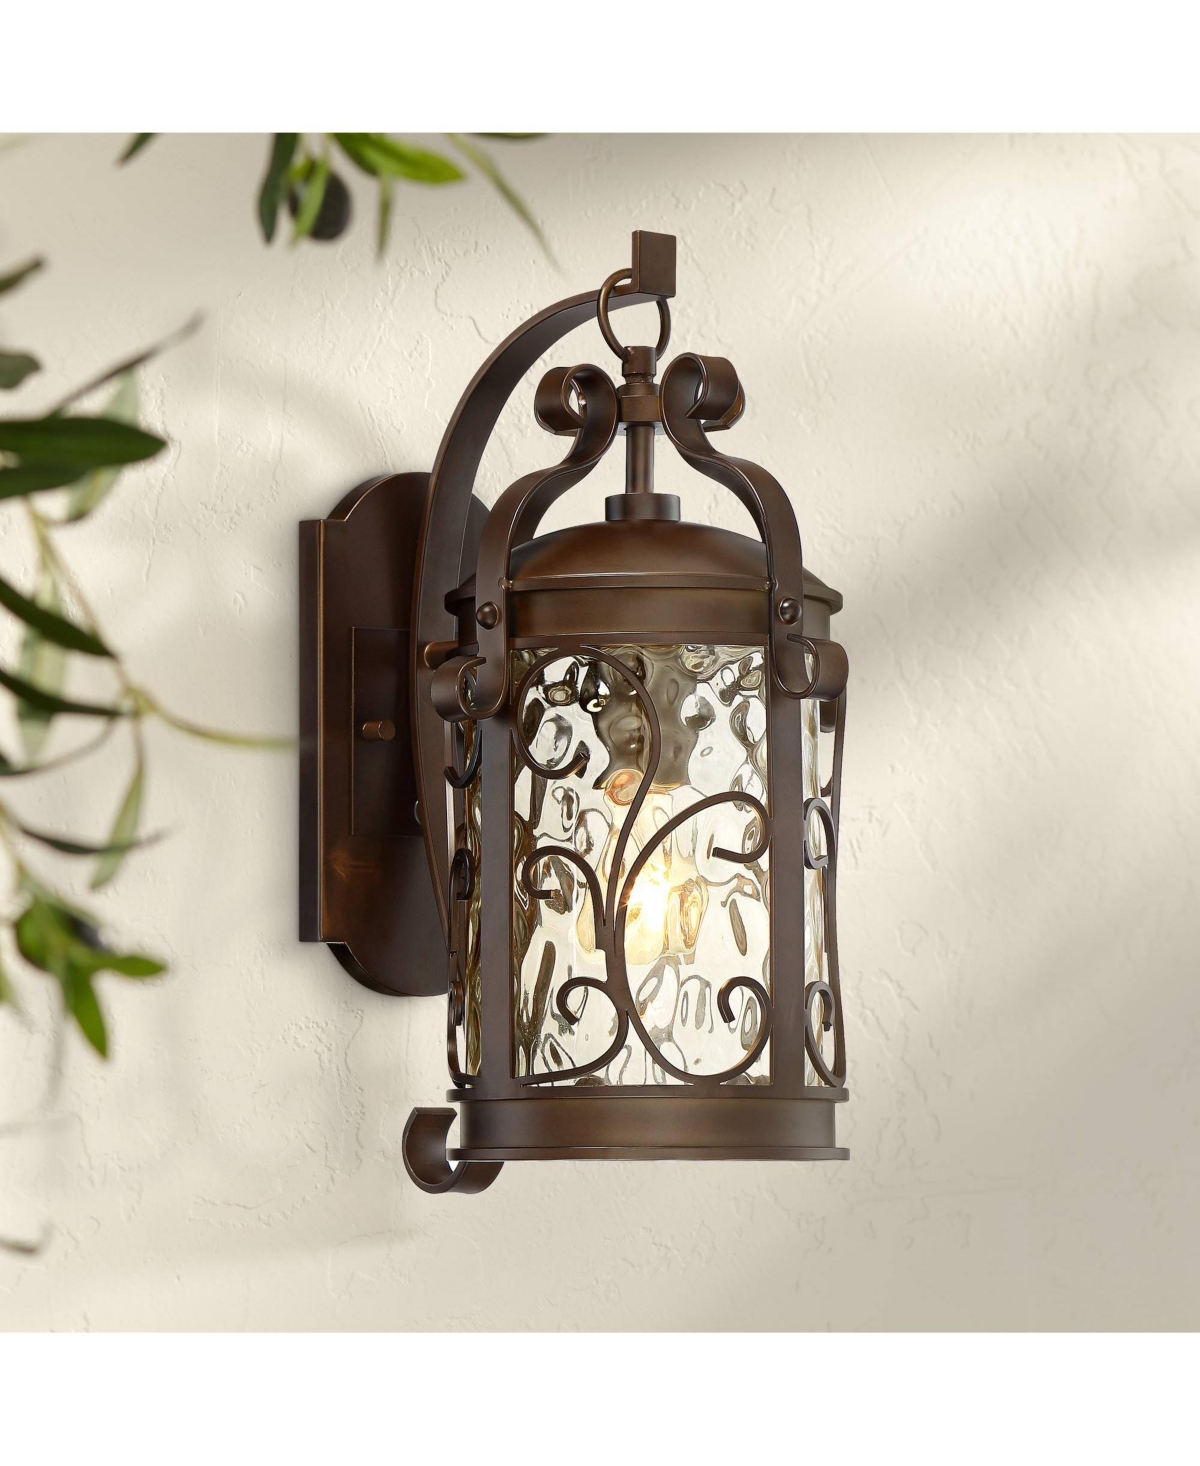 Conway European Outdoor Wall Light Fixture Oil Rubbed Bronze Brown Scroll 17 1/2" Hammered Glass for Exterior House Porch Patio Outside Deck Garage Ya